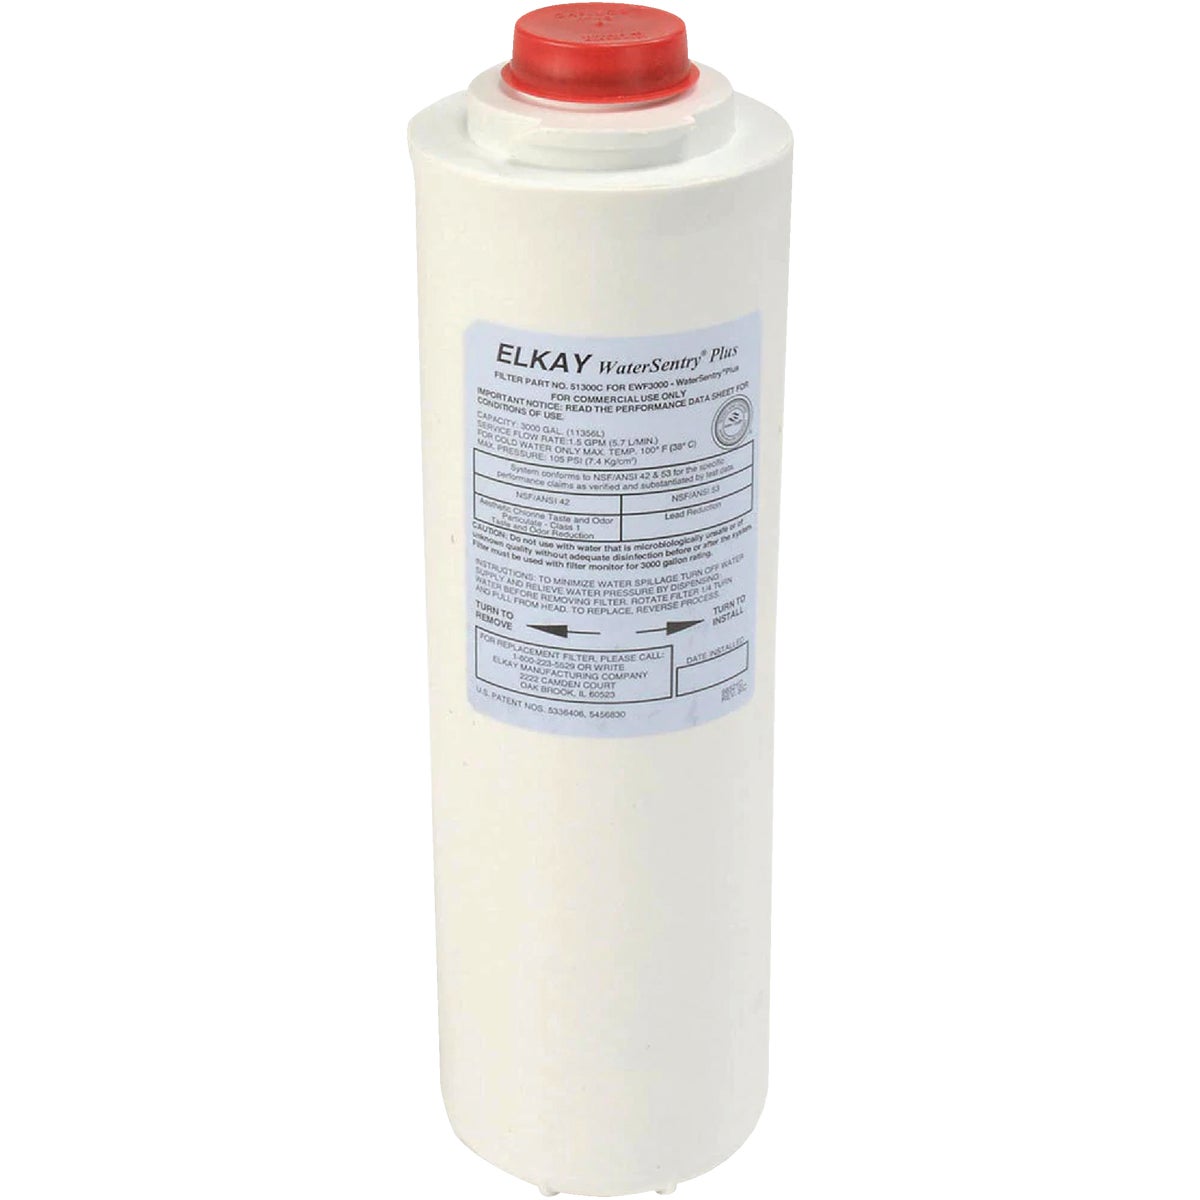 Item 454173, Replacement filter for models with WaterSentry Plus filtration system (